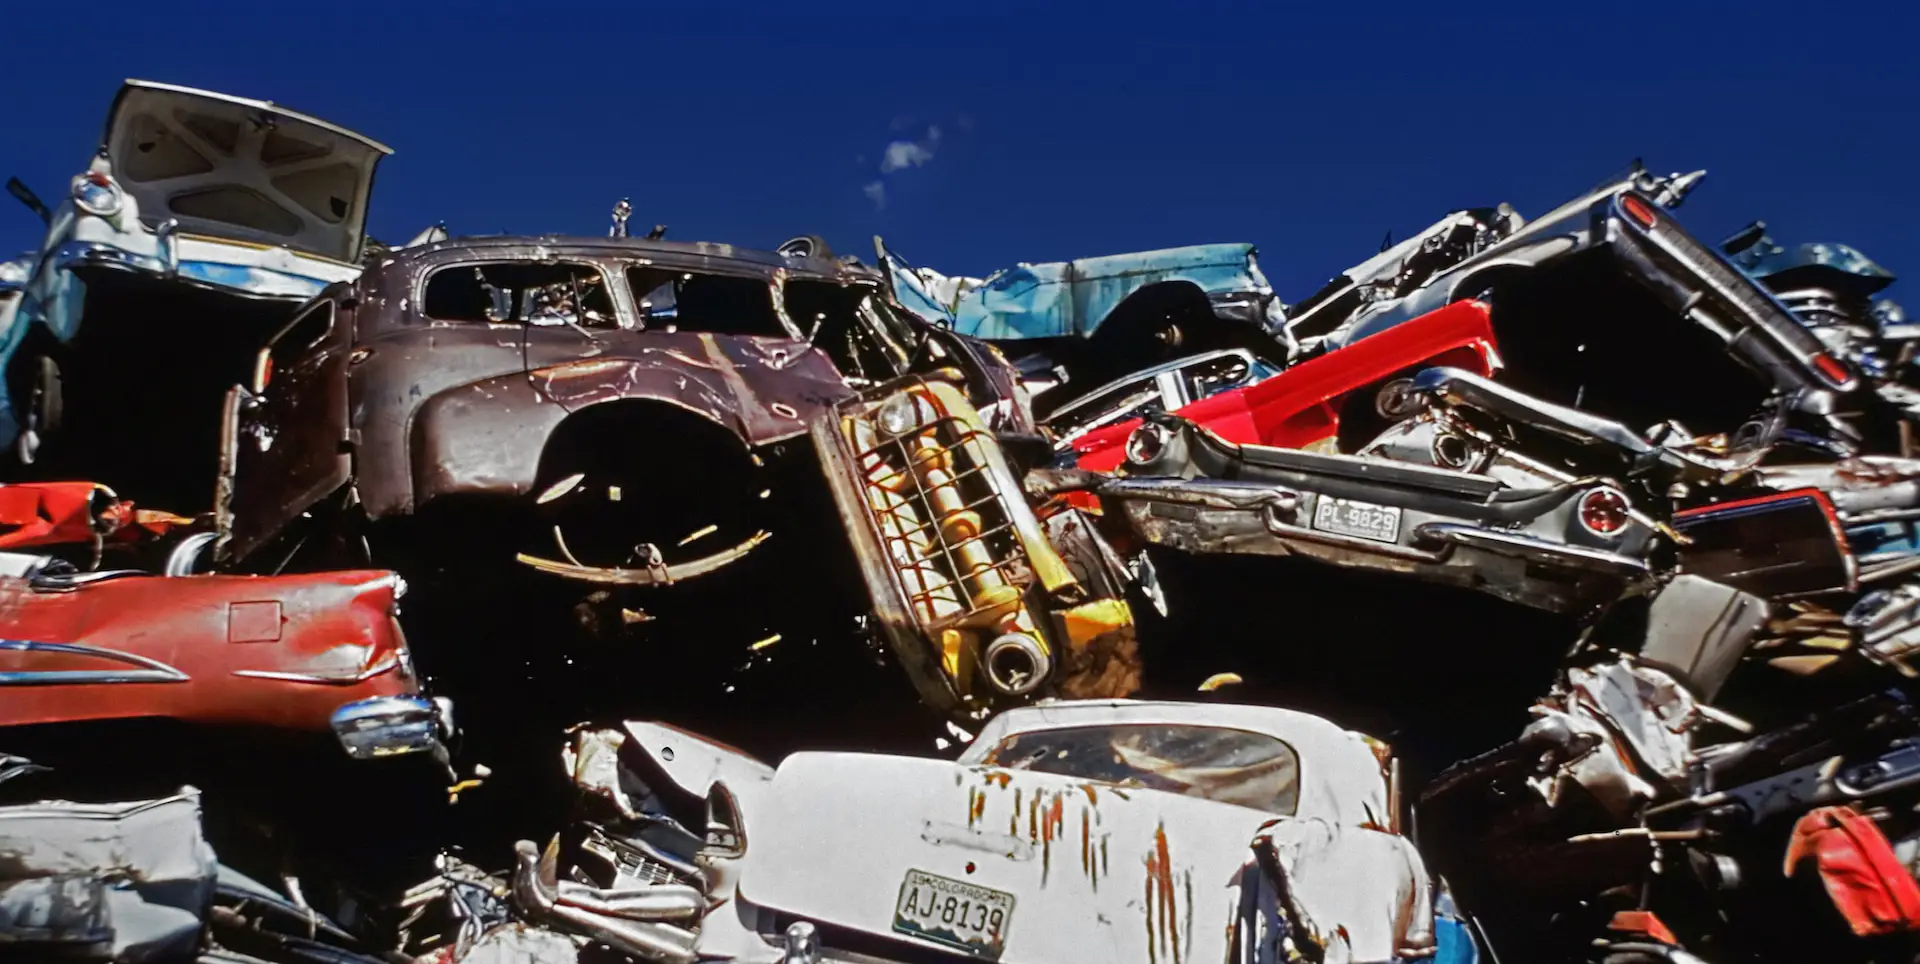 lots of scrapped cars piled up in front of a blue sky